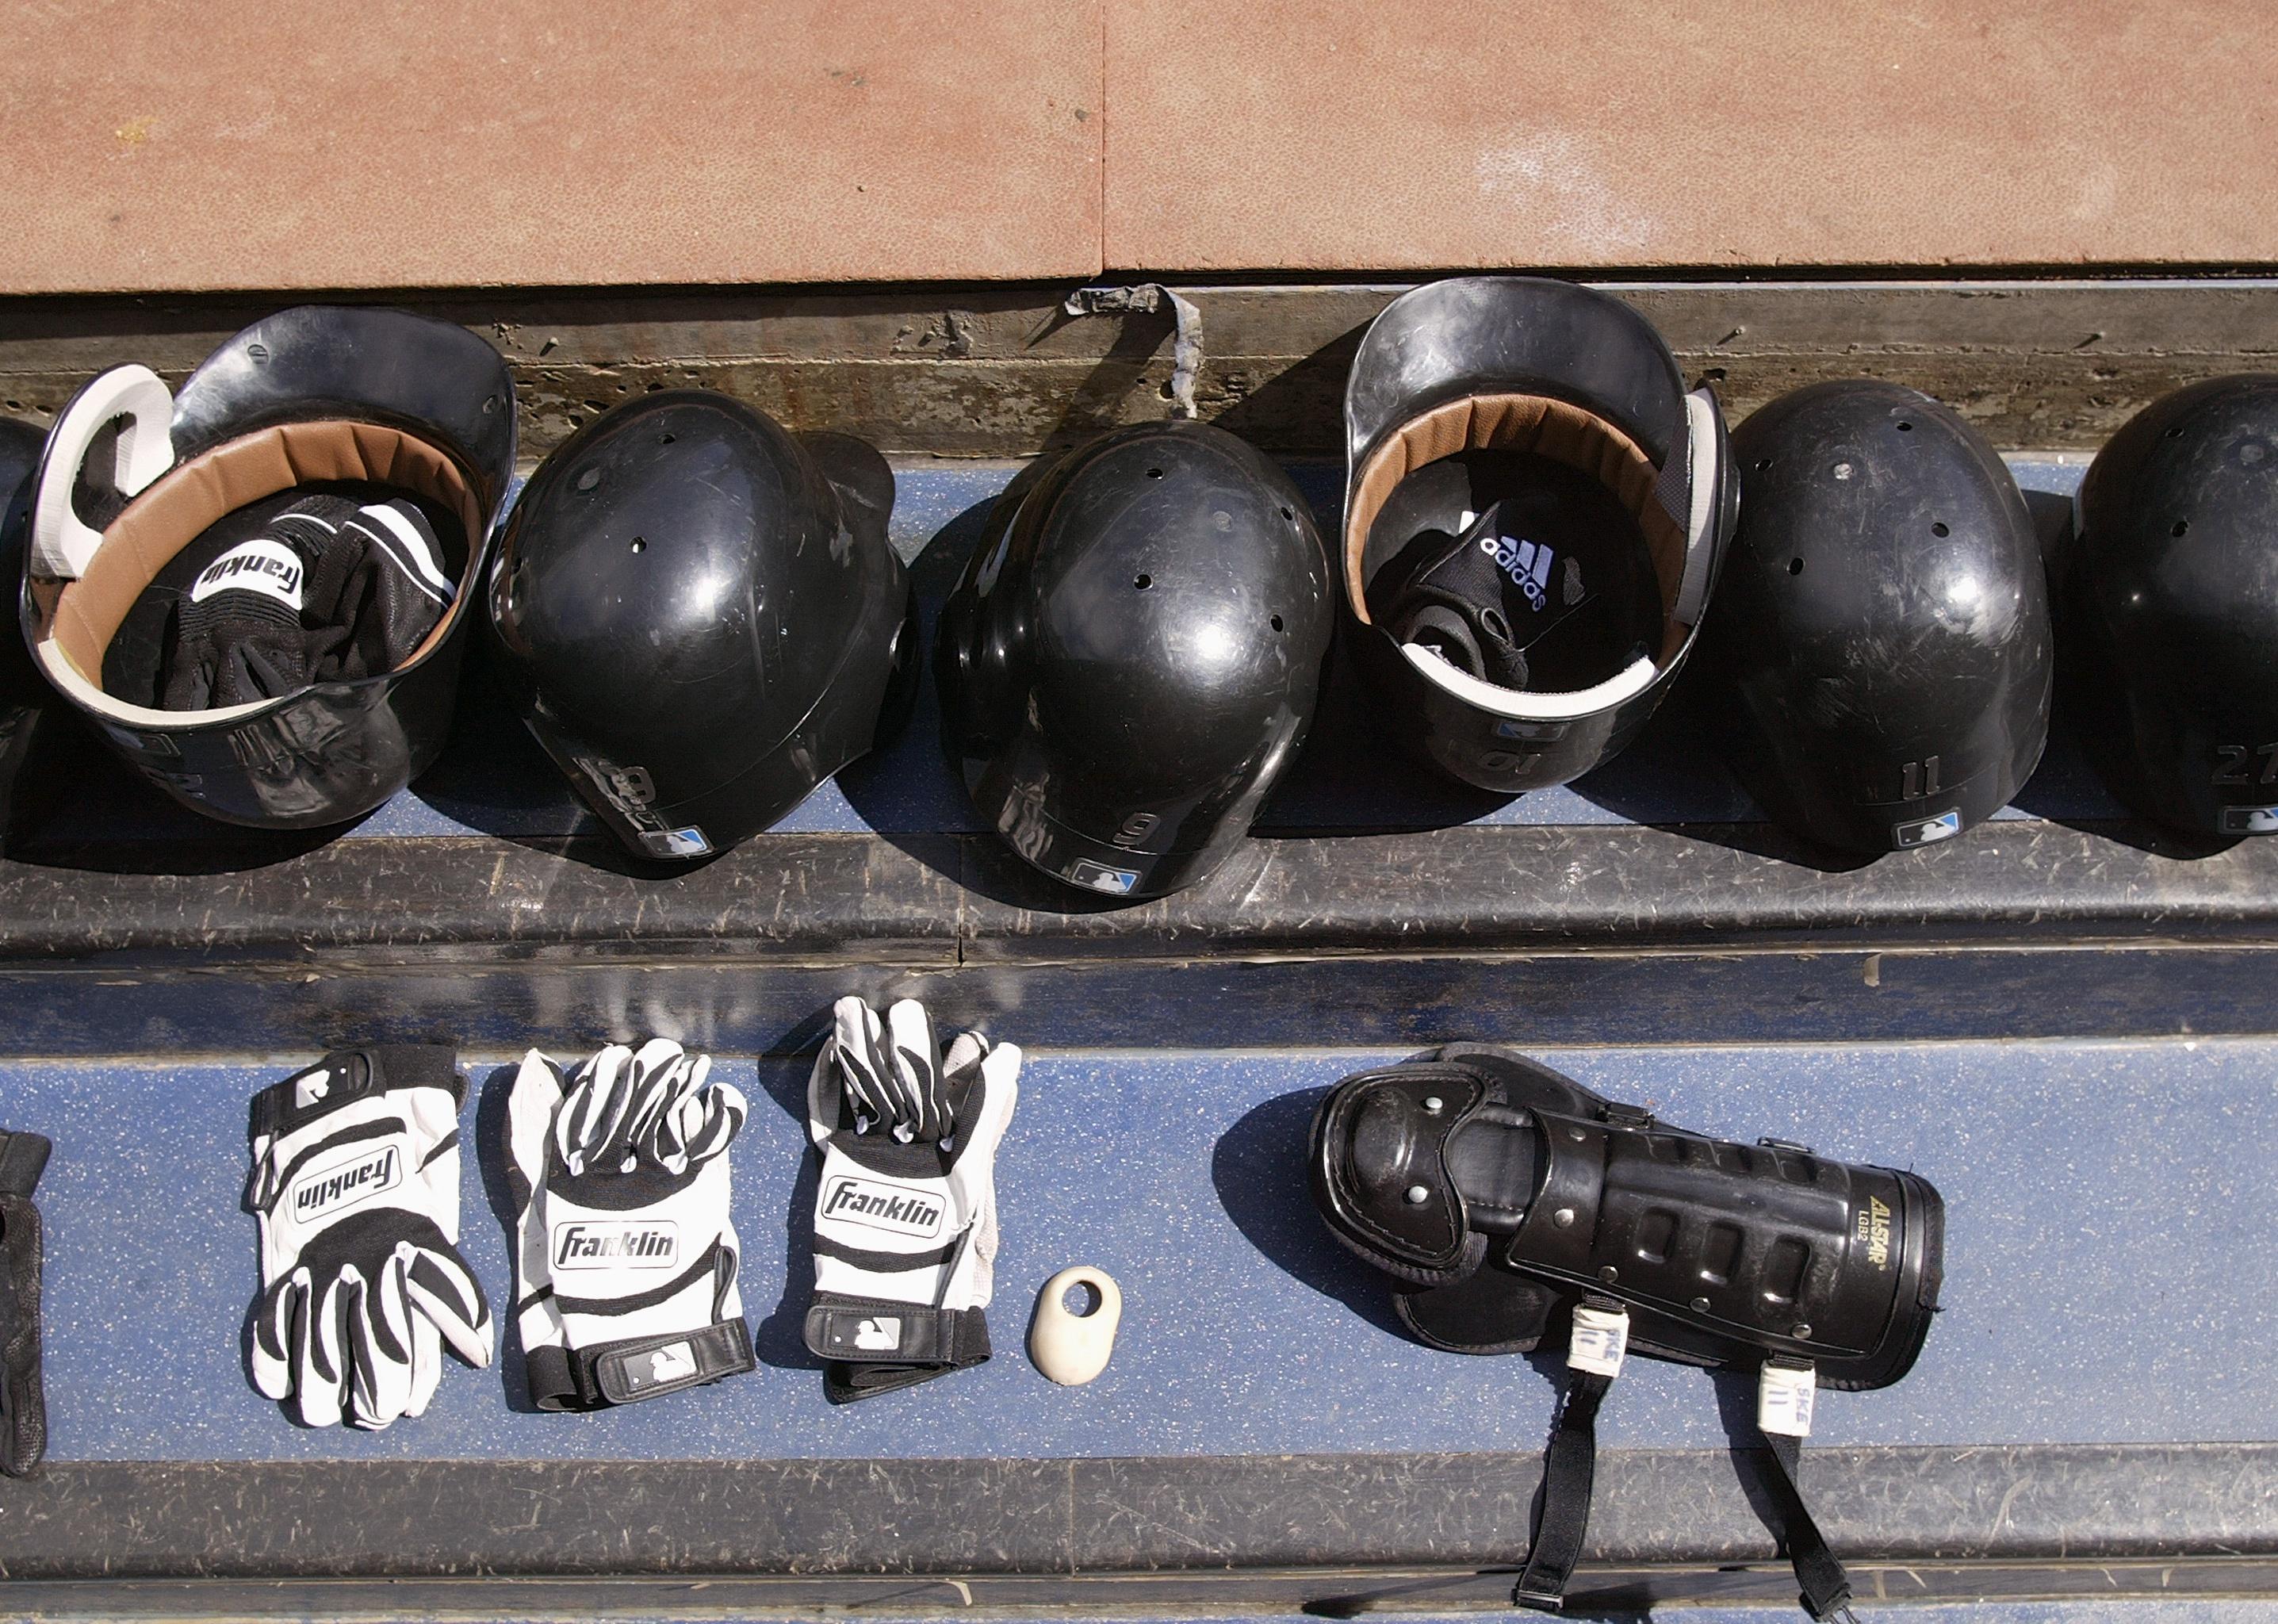 Detail of baseball helmets, gloves, and a knee guard.